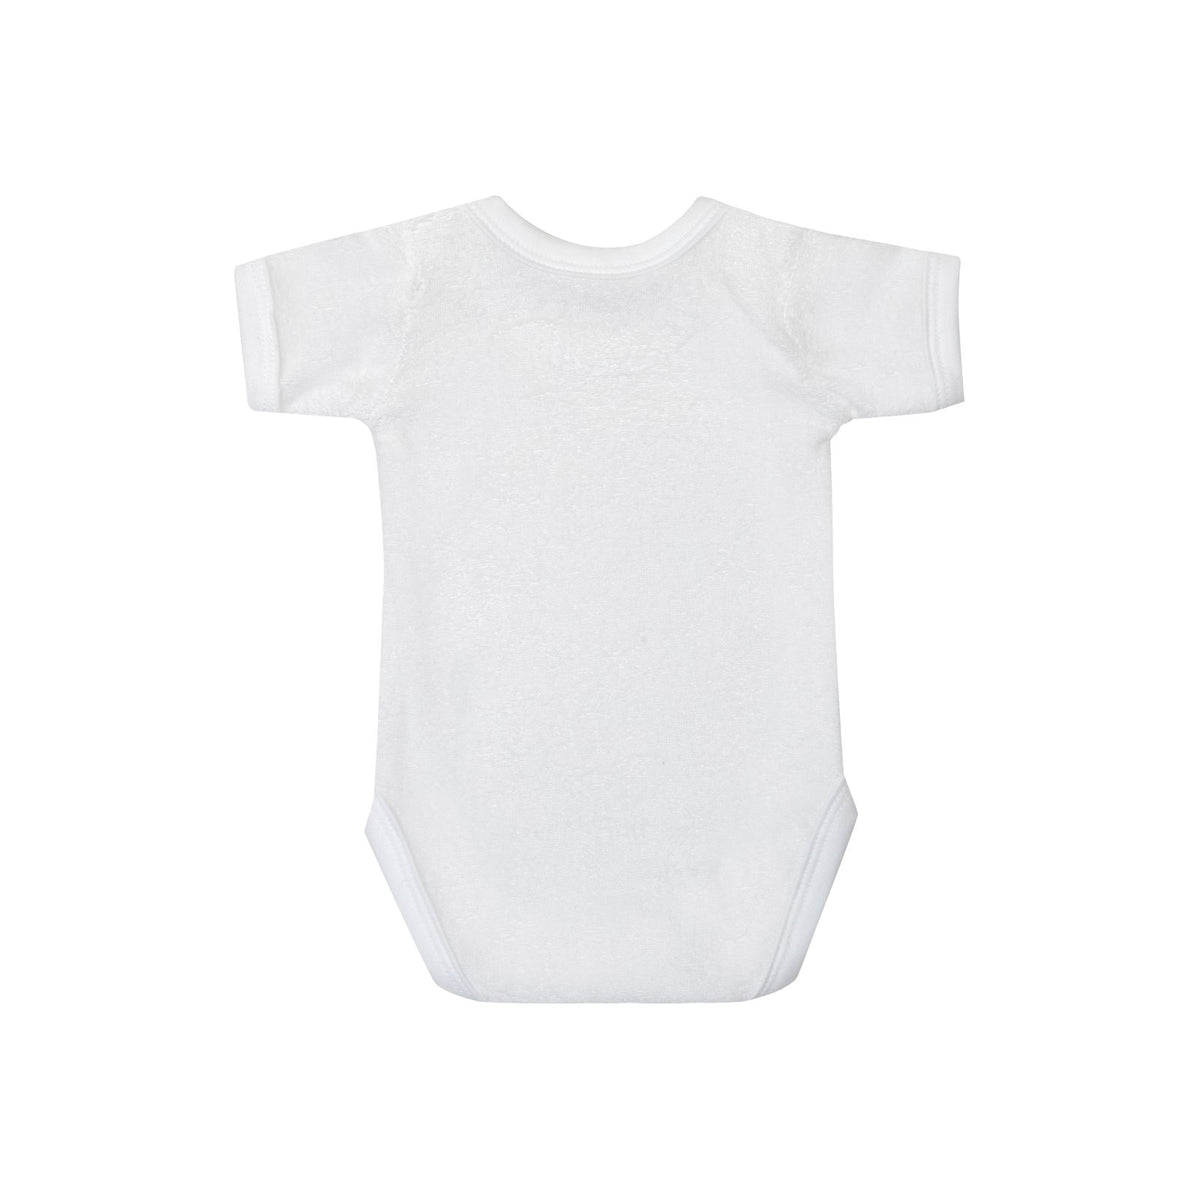 Baby Boys & Girls Terry Towelling Bodysuit, Baby Vest, Made in UK ...